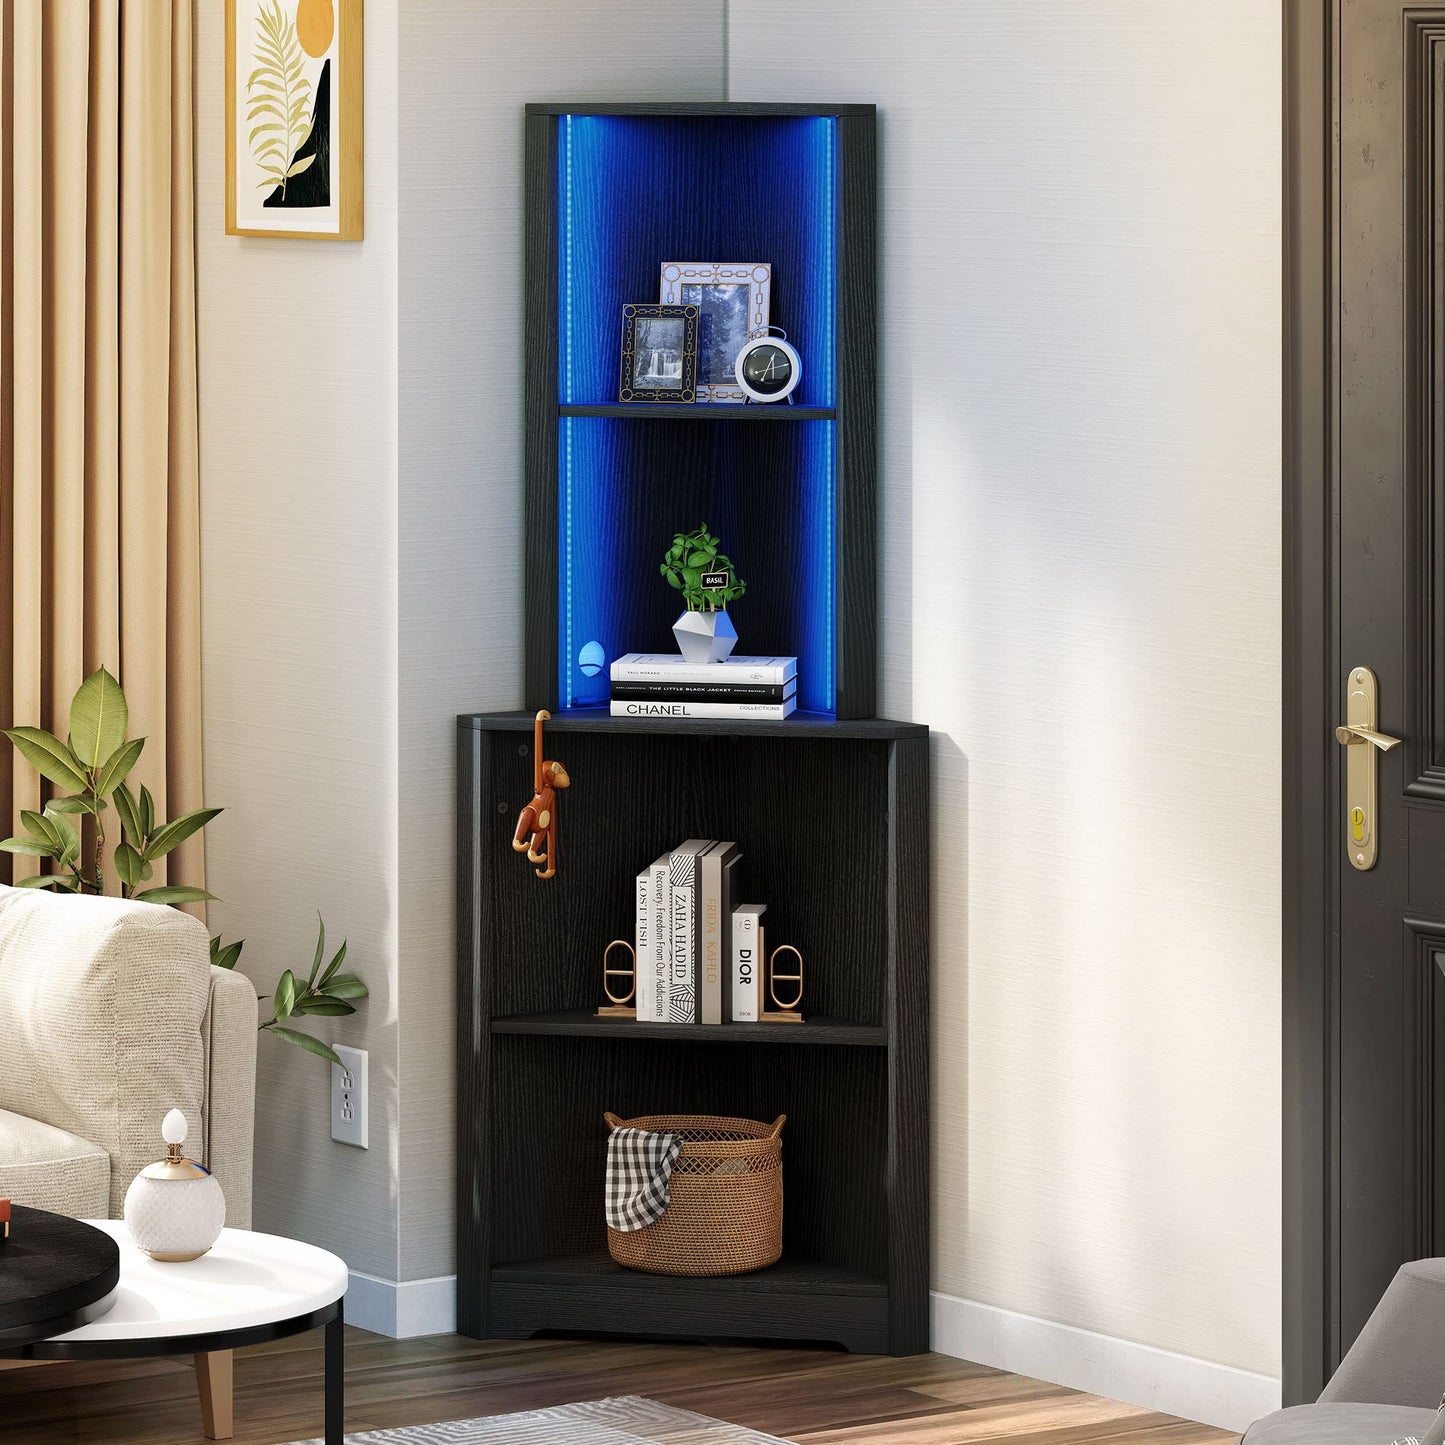 YITAHOME Corner Shelf Stand with Led Light, 5 Tier Corner Bookshelf and Bookcase, Wooden Open Corner Cabinet Display Storage Rack for Bedroom,Living